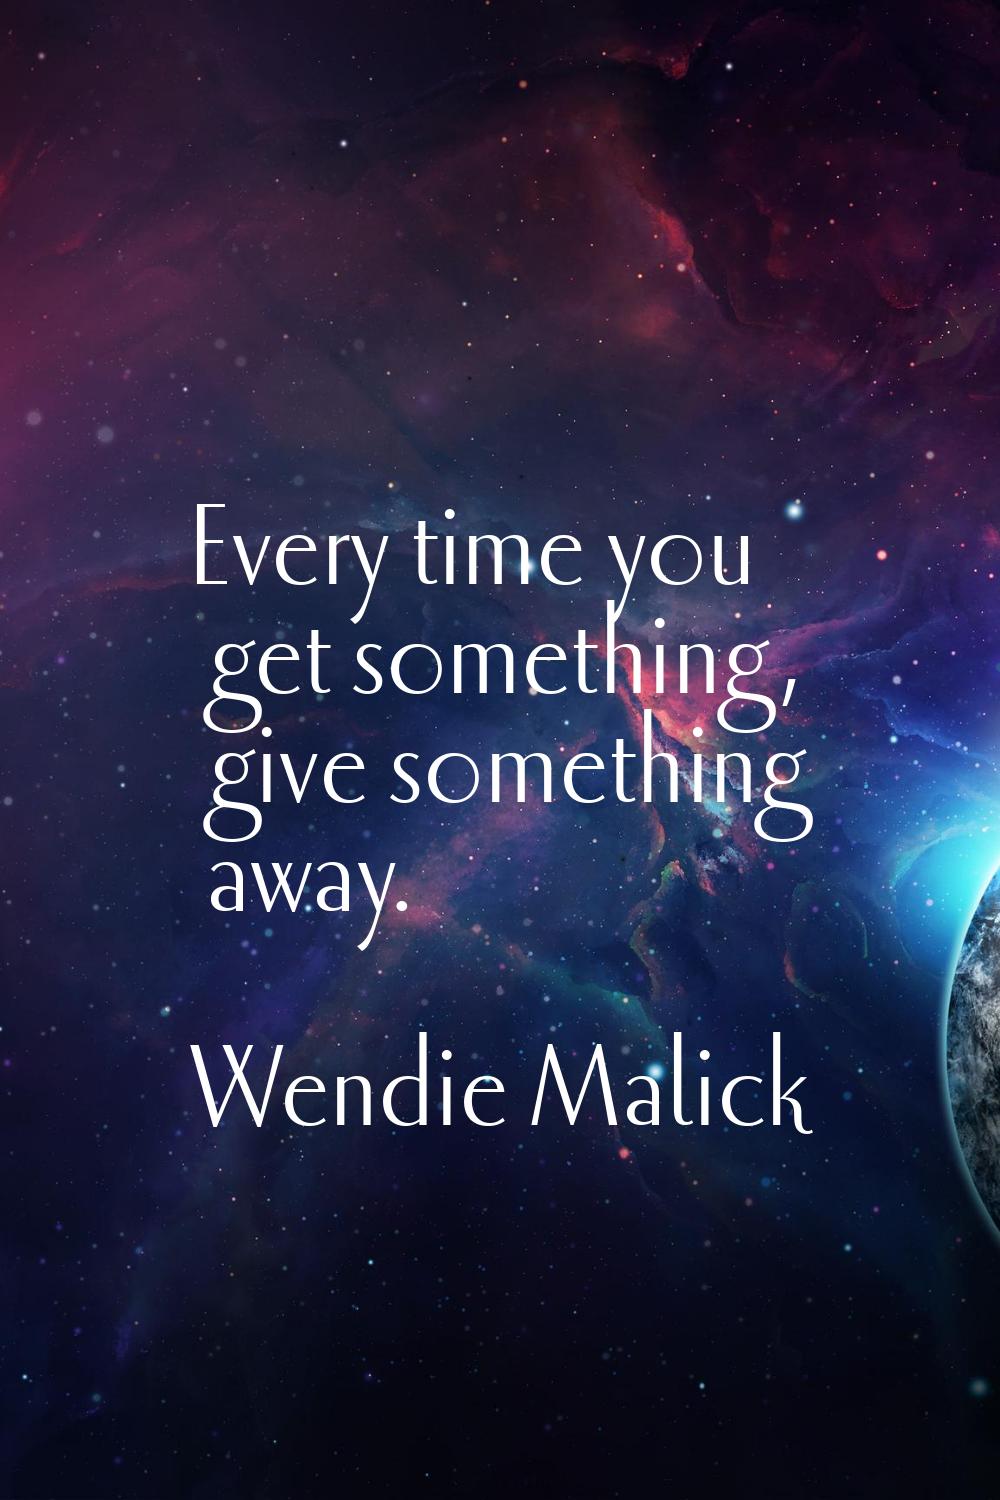 Every time you get something, give something away.